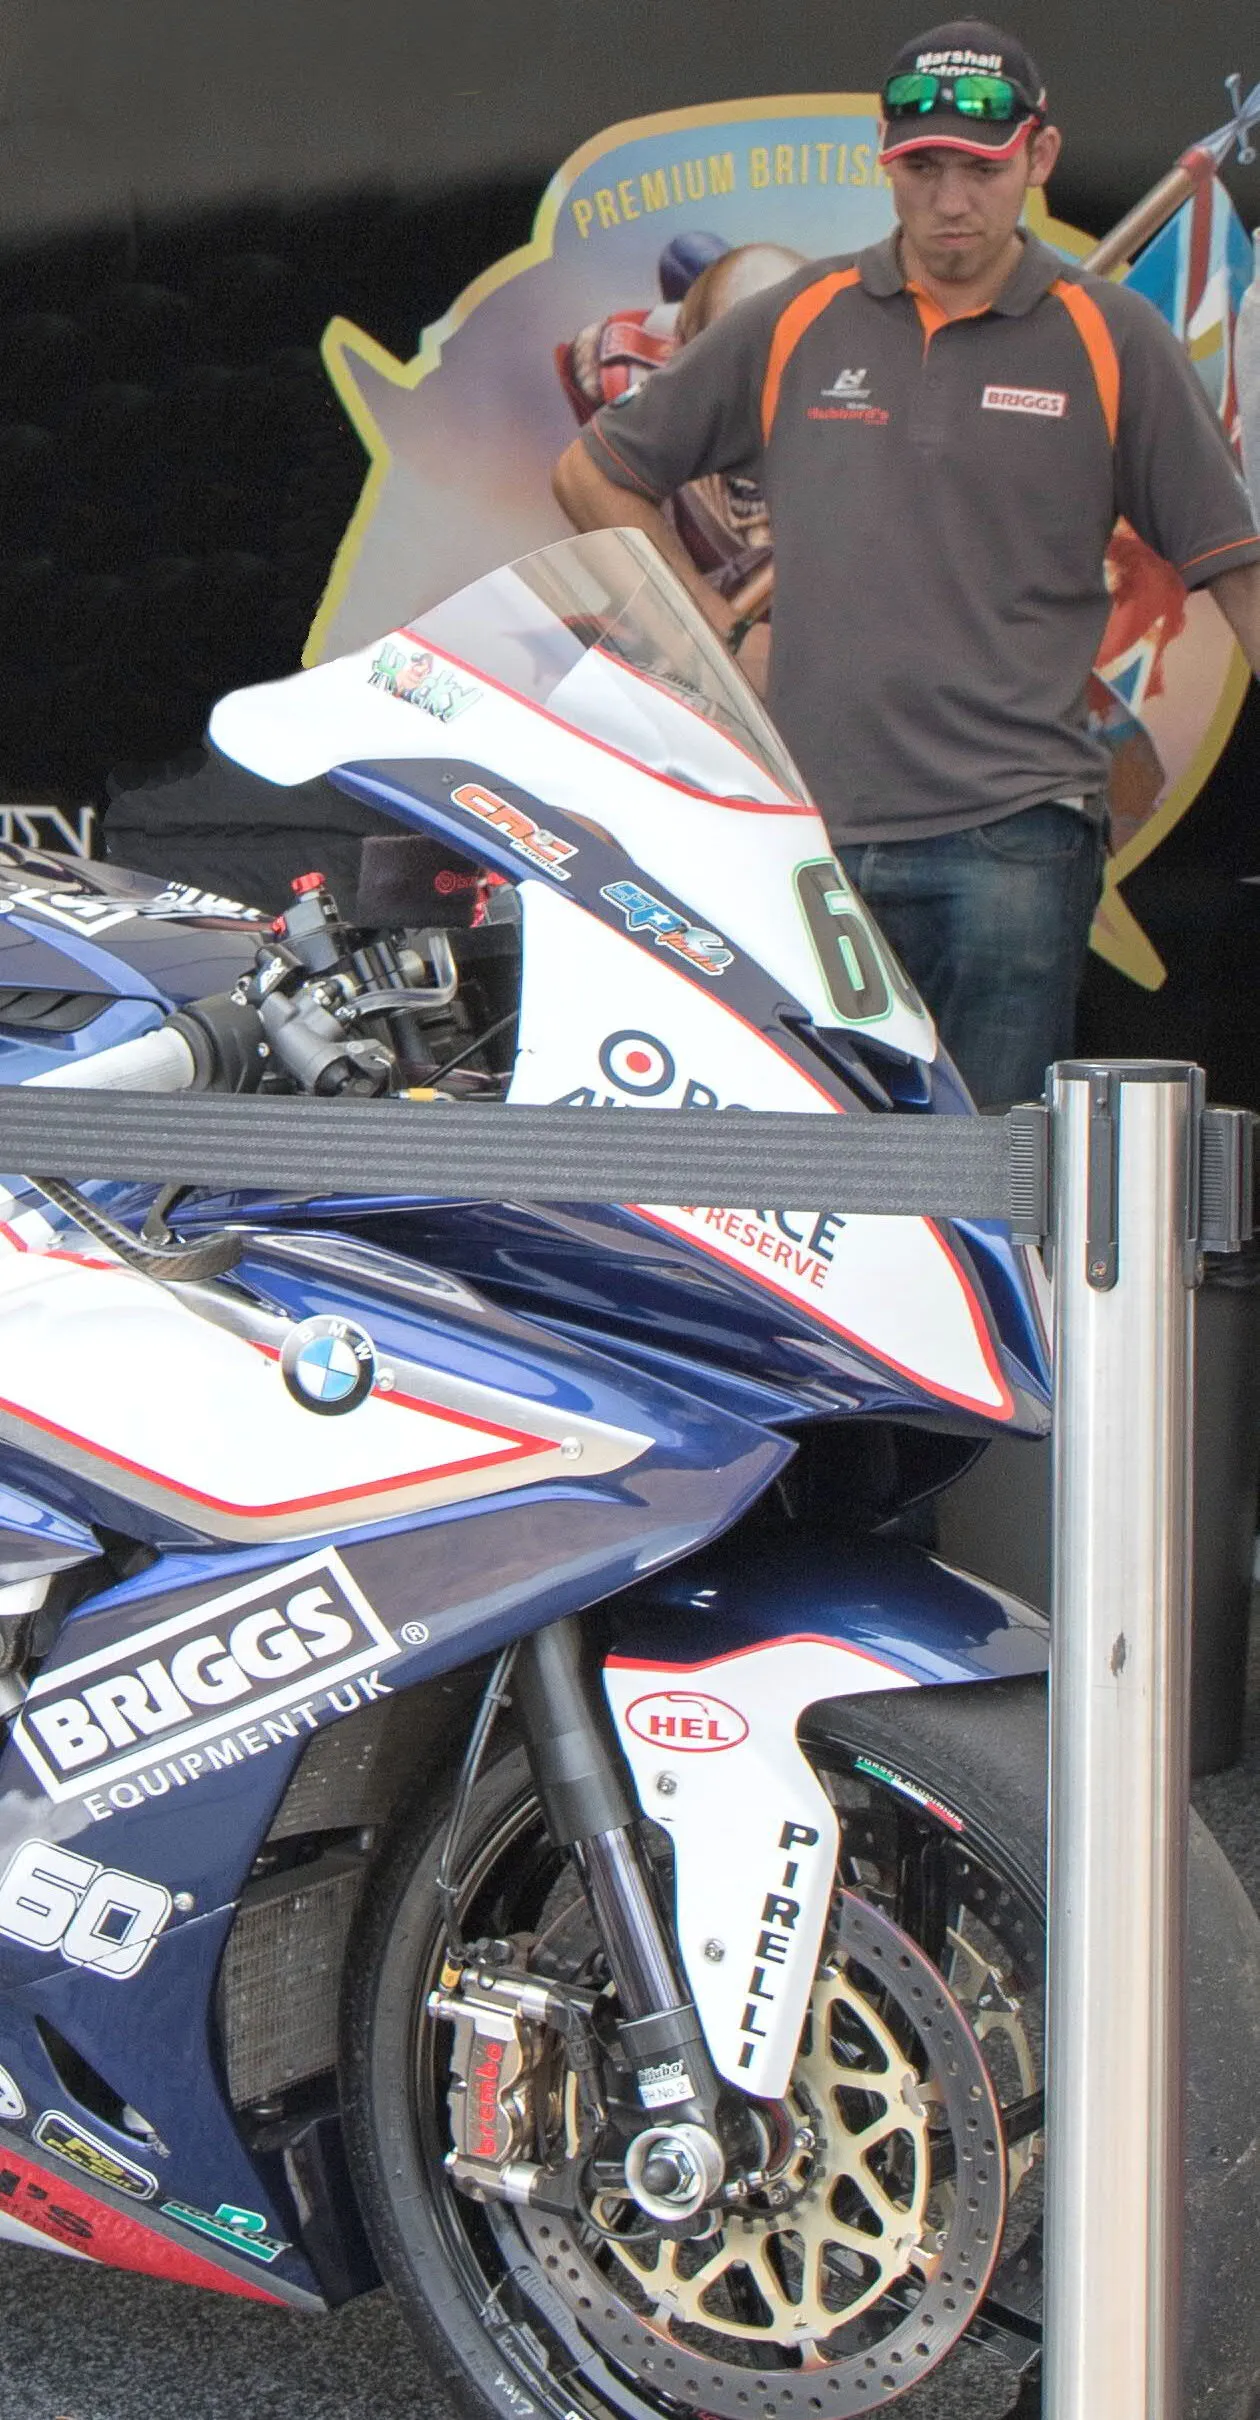 Photo showing: English motorcycle road-racer Peter Hickman with the British Superbike specification BMW S1000RR sponsored by Briggs Equipment and RAF Reserves at 2015 Isle of Man TT races